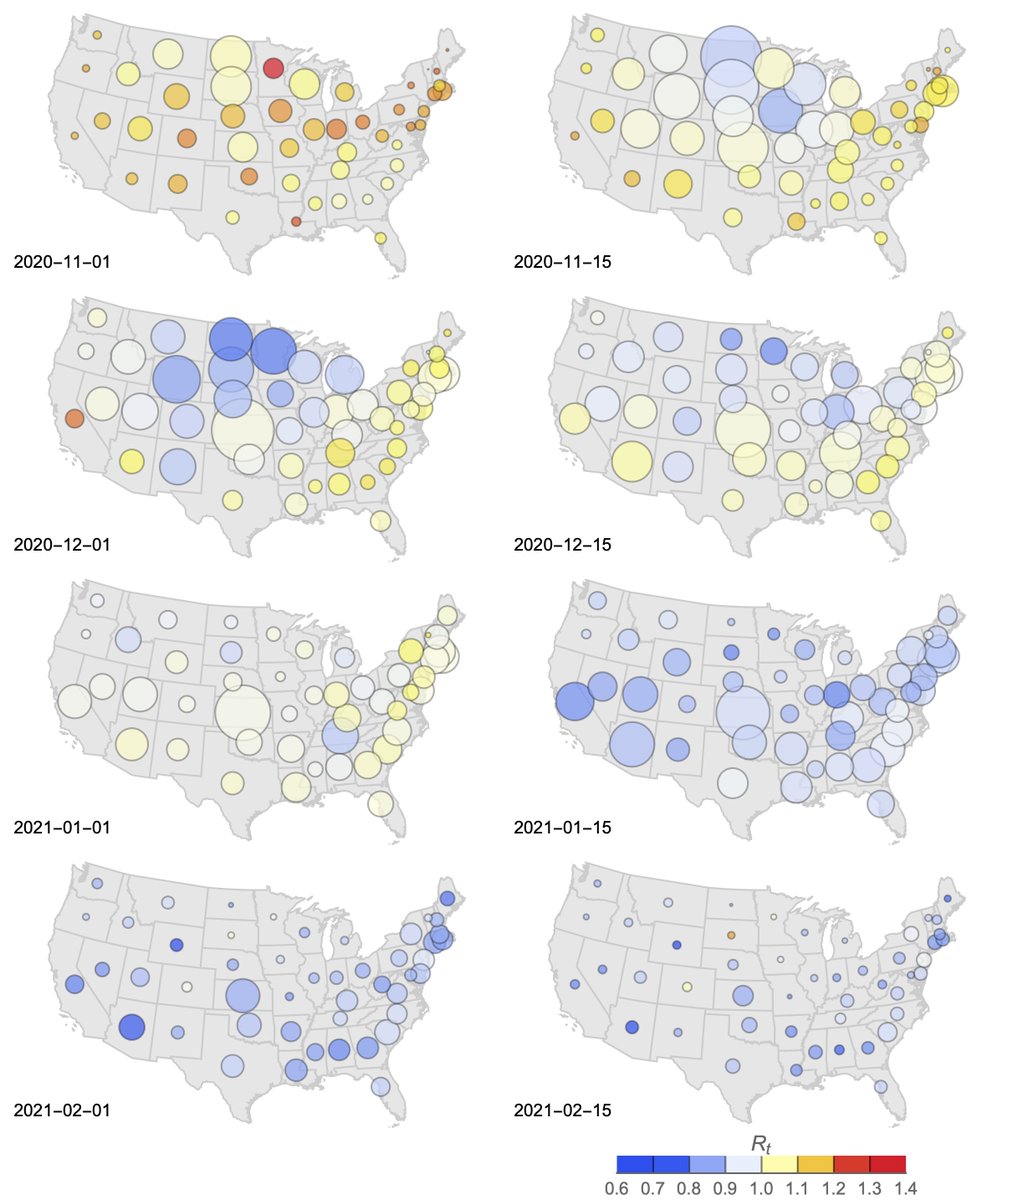 The US fall/winter epidemic is illustrated here as a series of twice monthly snapshots with bubble size representing per-capita case counts in a state and bubble color representing Rt, where red indicates growing epidemics and blue represents declining epidemics. 4/13